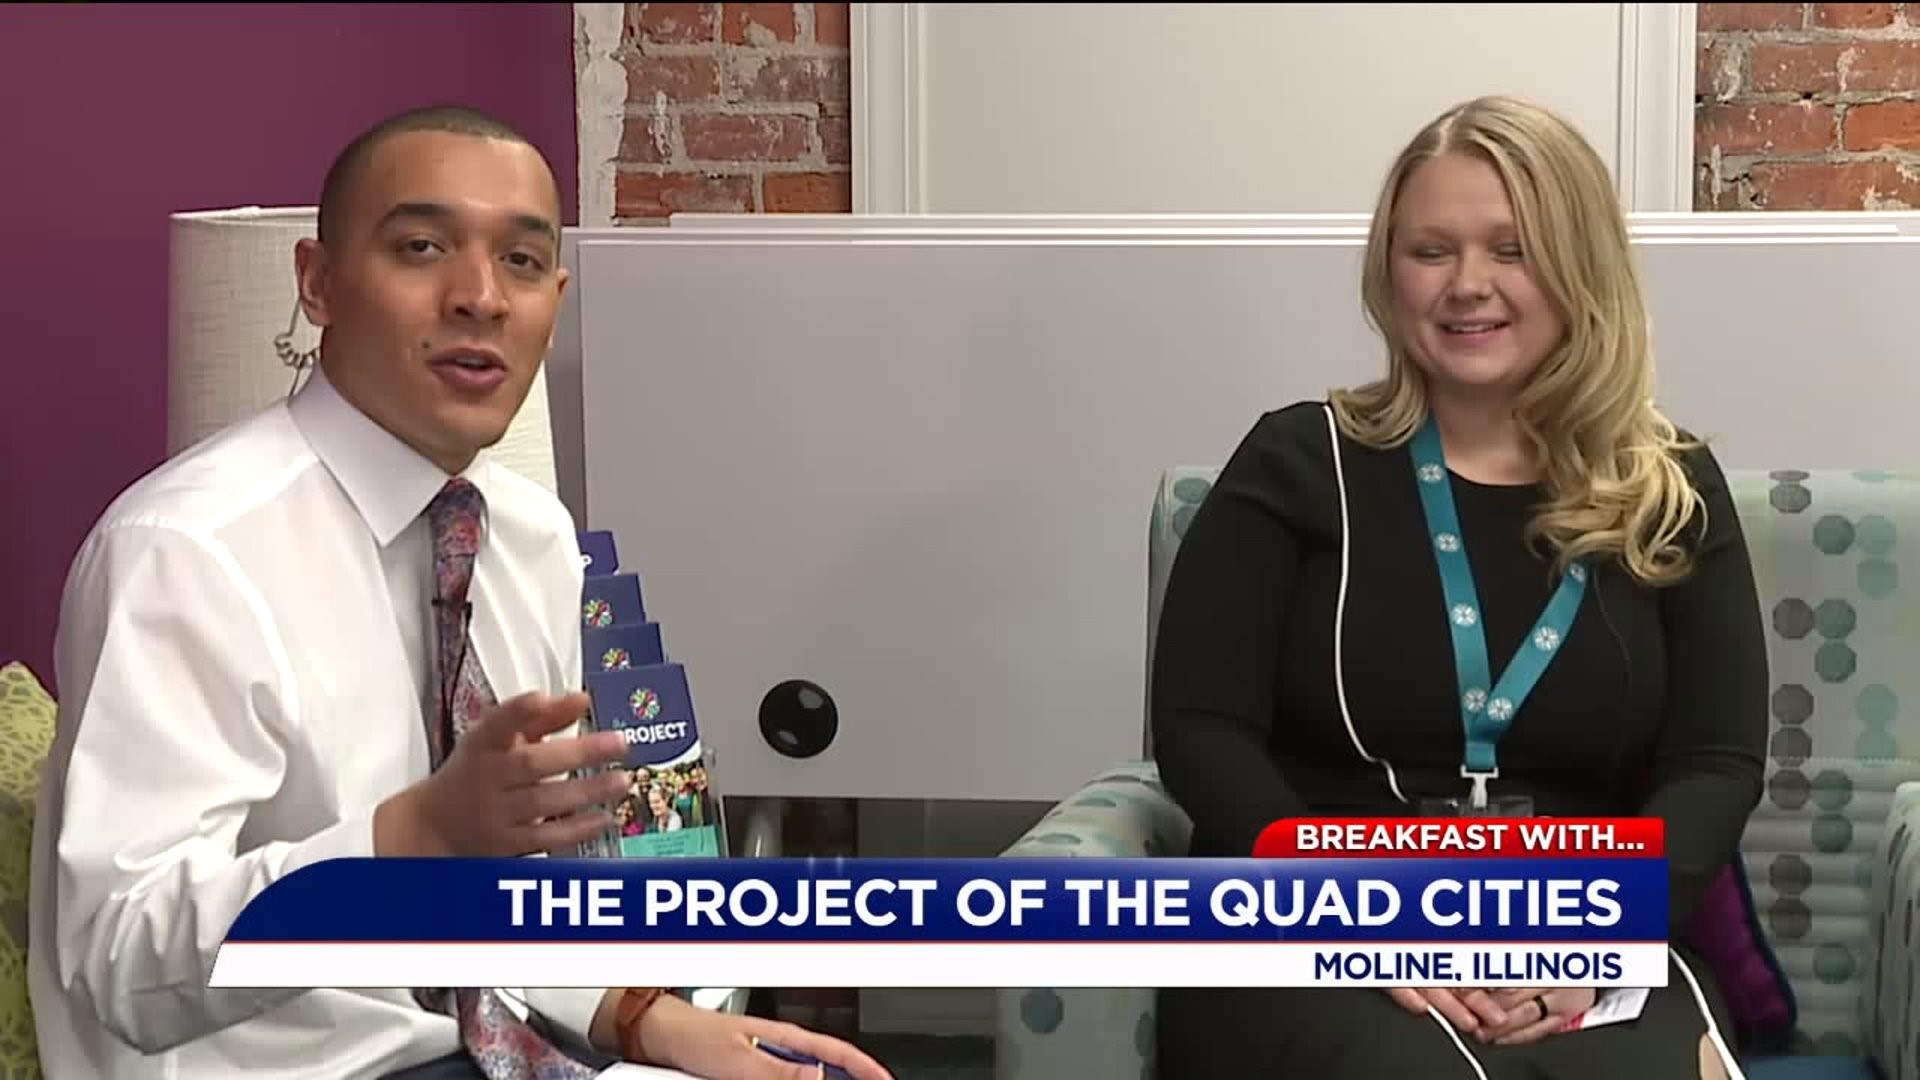 Breakfast With: Introducing The Project of the Quad Cities